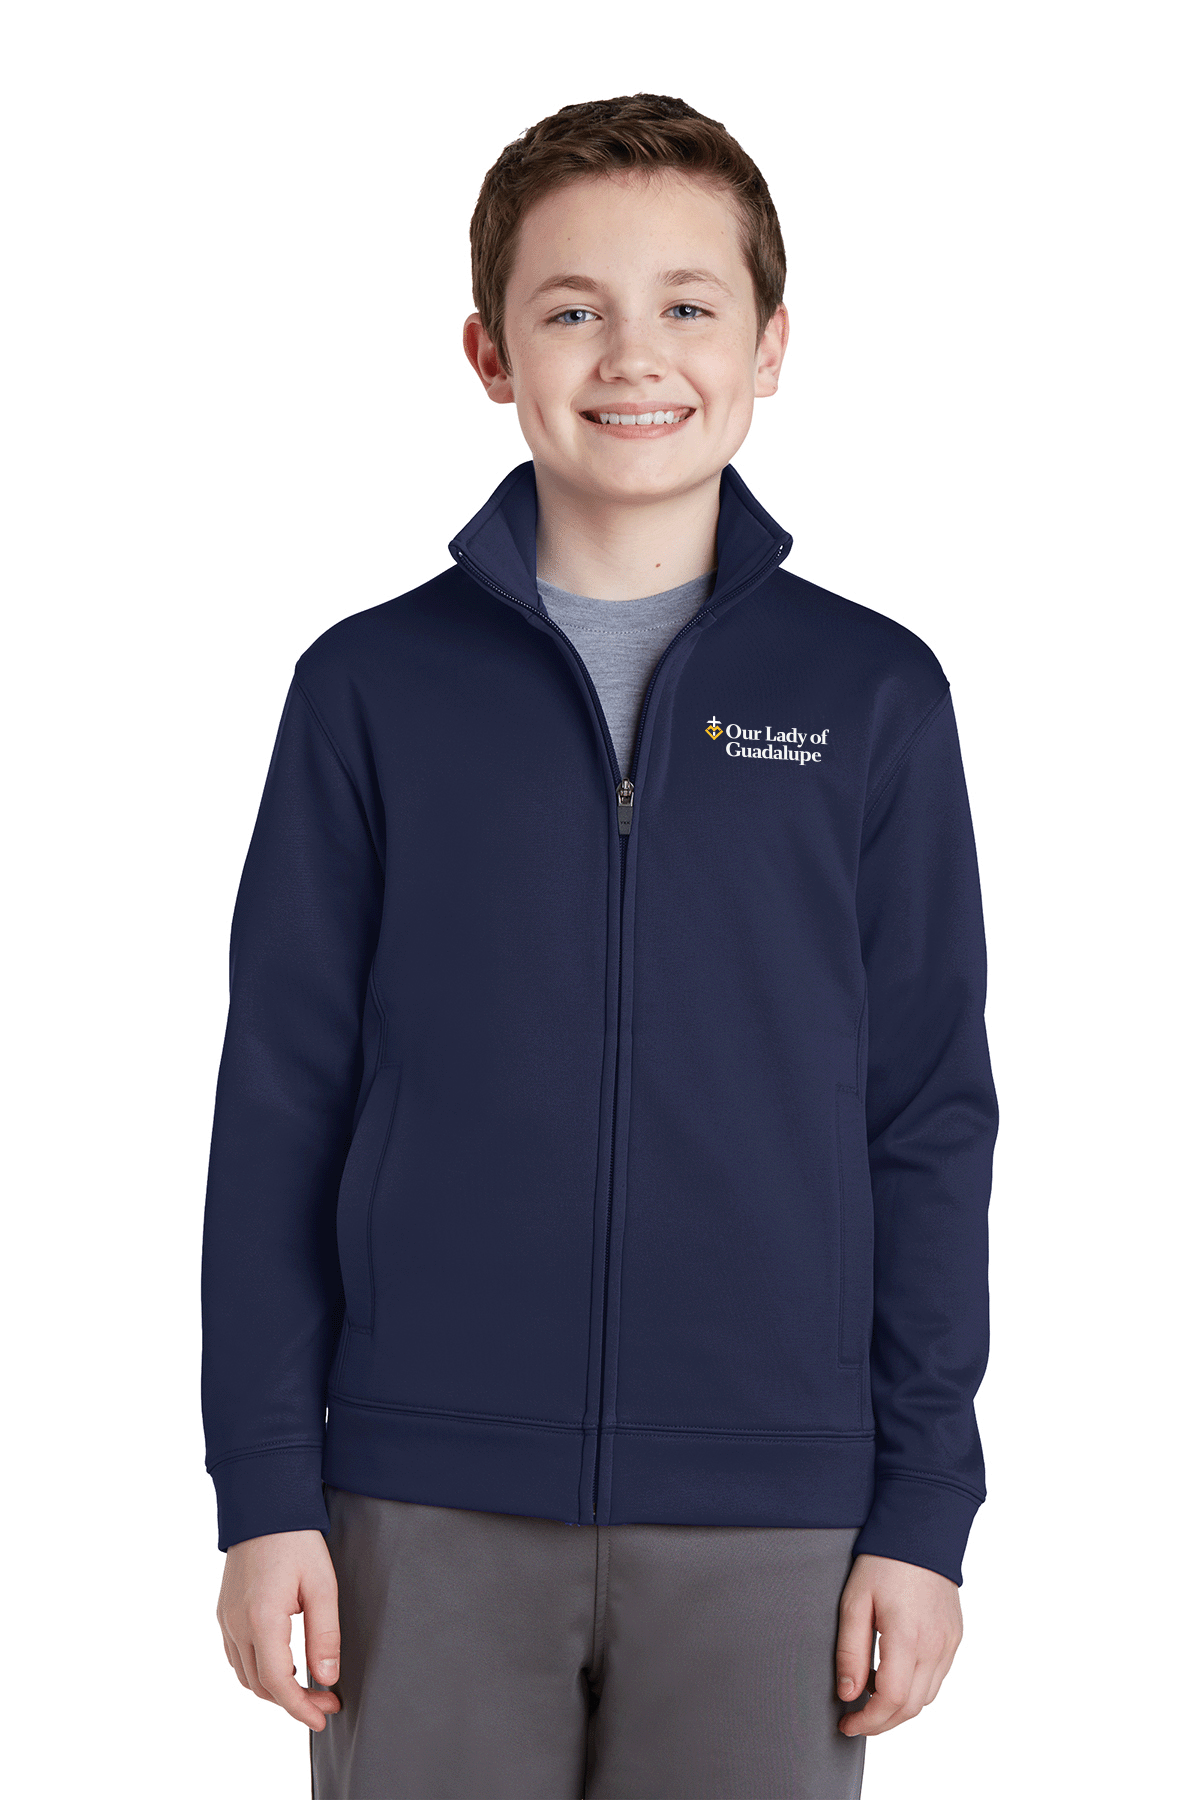 YST241 - OUR LADY OF GUADALUPE - Youth Sport Tek Full Zip Jacket